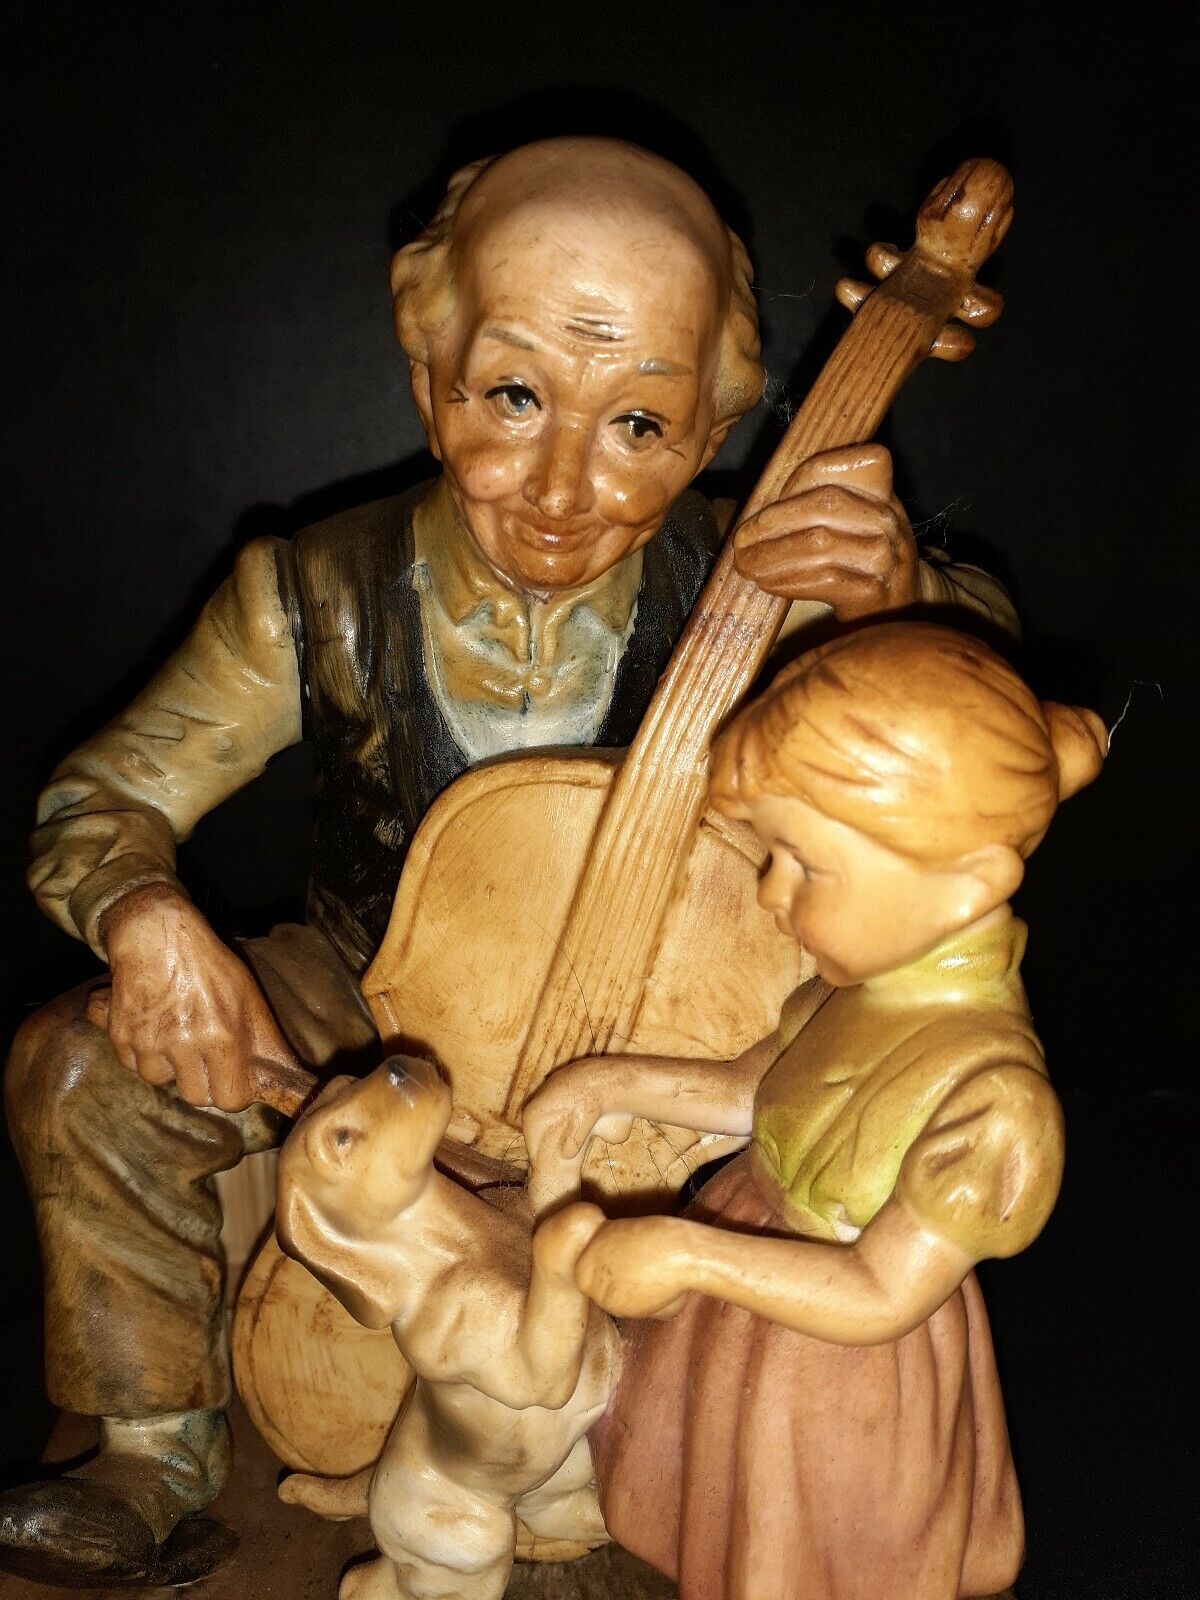 A Price Import Japan Figurine Grandpa Cello Girl And Dog Porcelain